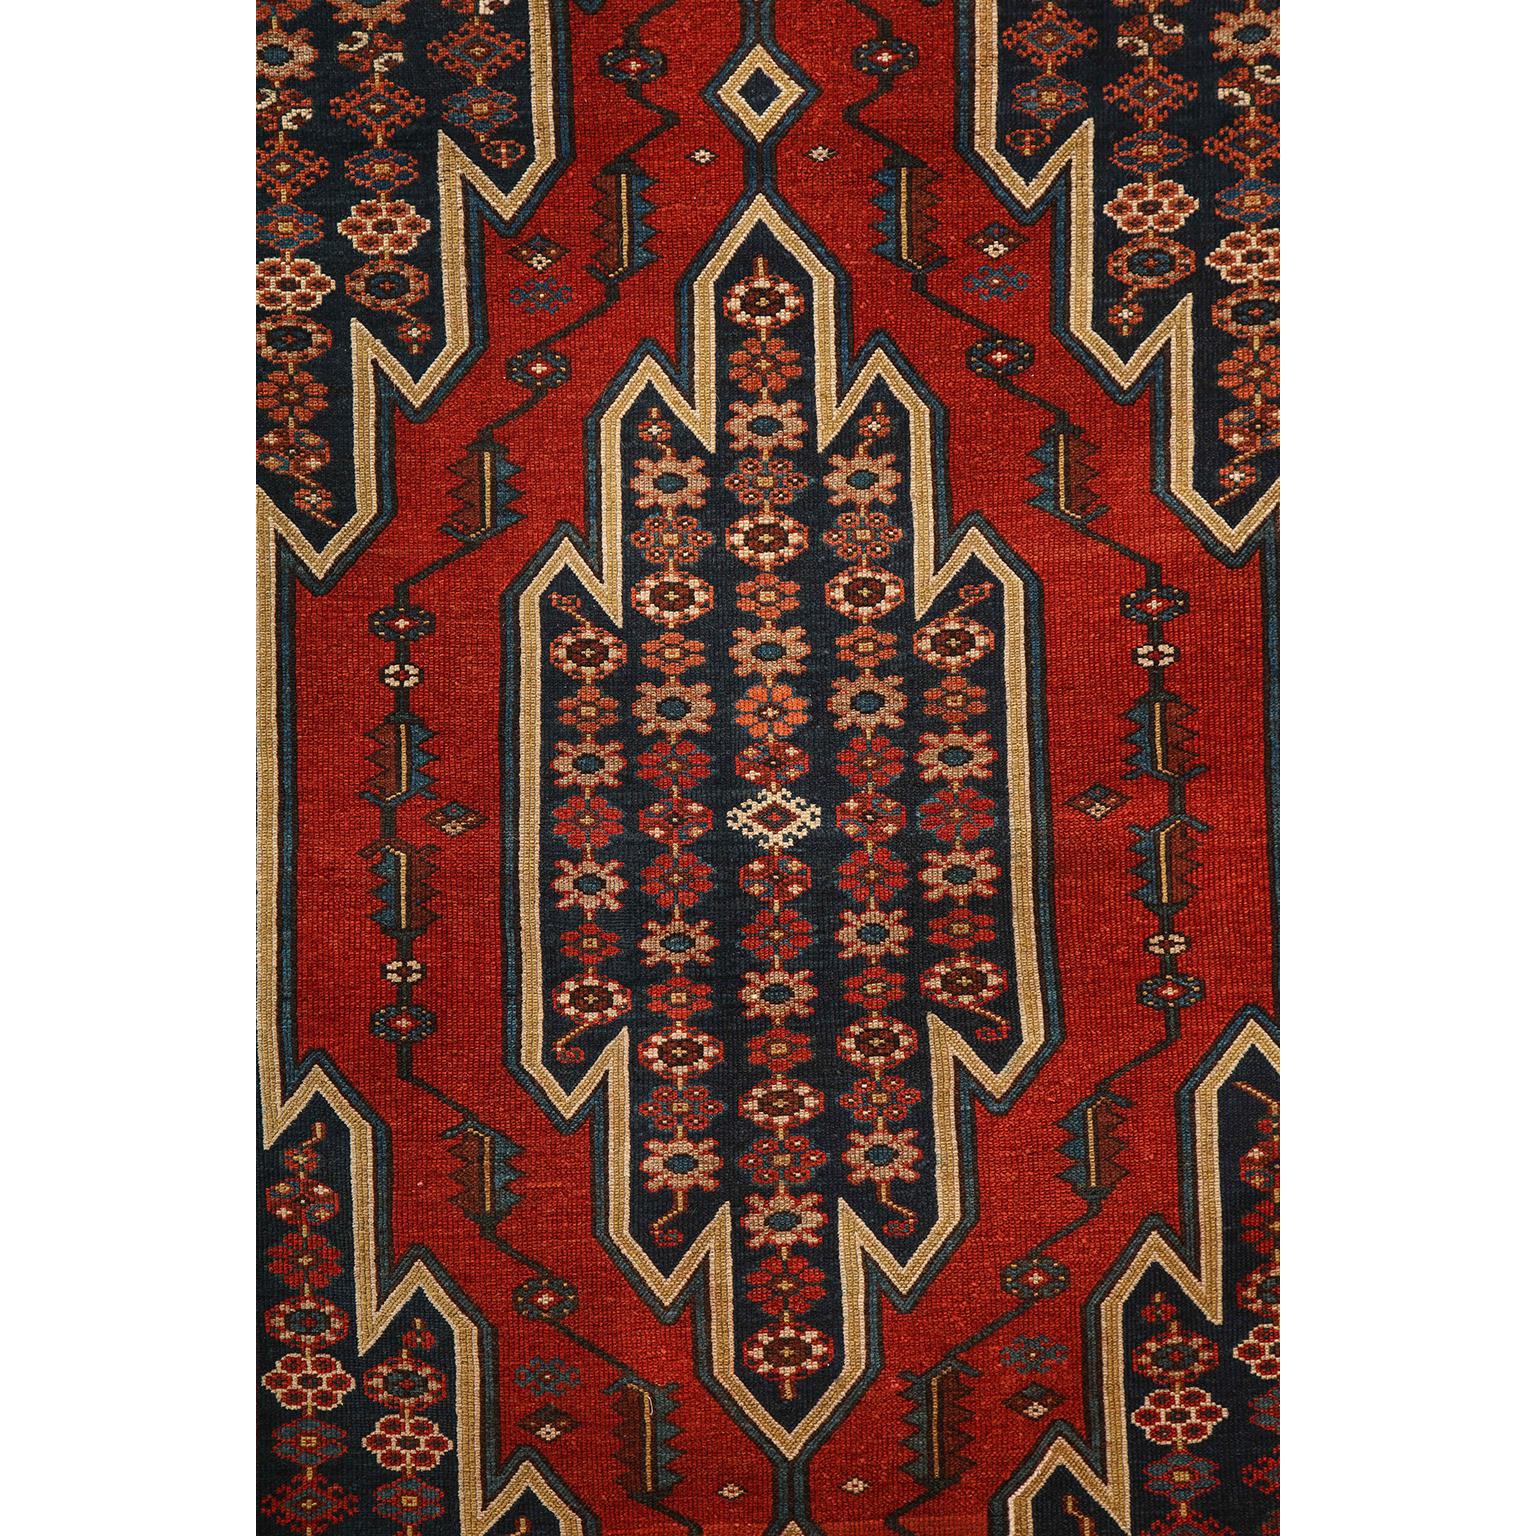 This antique Persian Mazlaghan carpet in pure wool and vegetable dyes circa 1920 features a geometrically striking central medallion with layered borders and a patterned field of stylized floral motifs. Its bold patterning is balanced by its organic